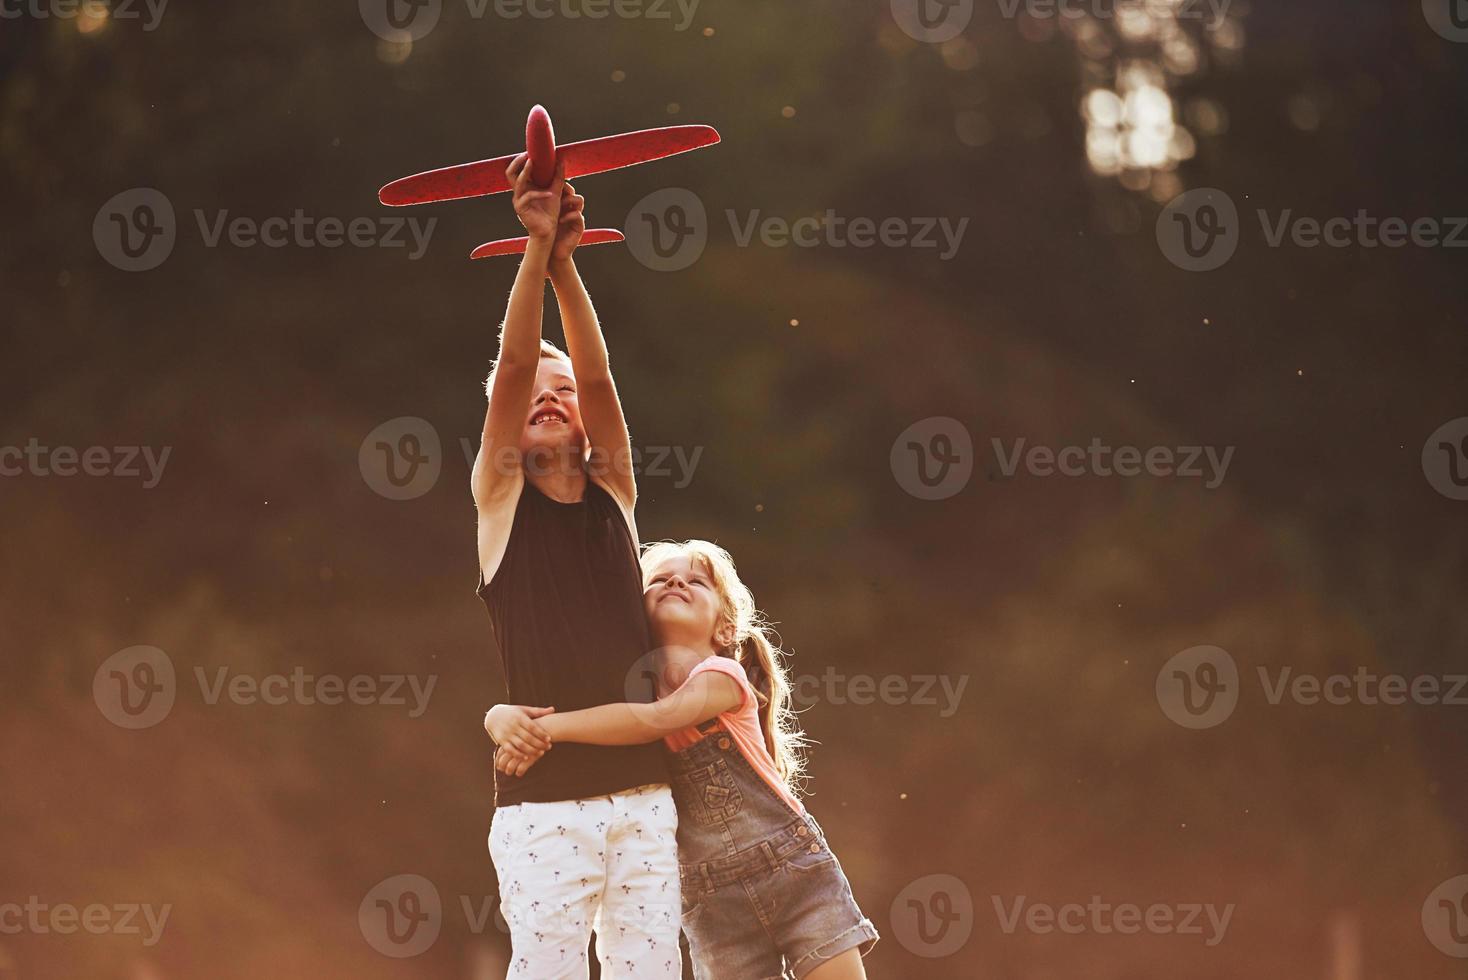 Girl and boy having fun outdoors with red toy airplane in hands photo